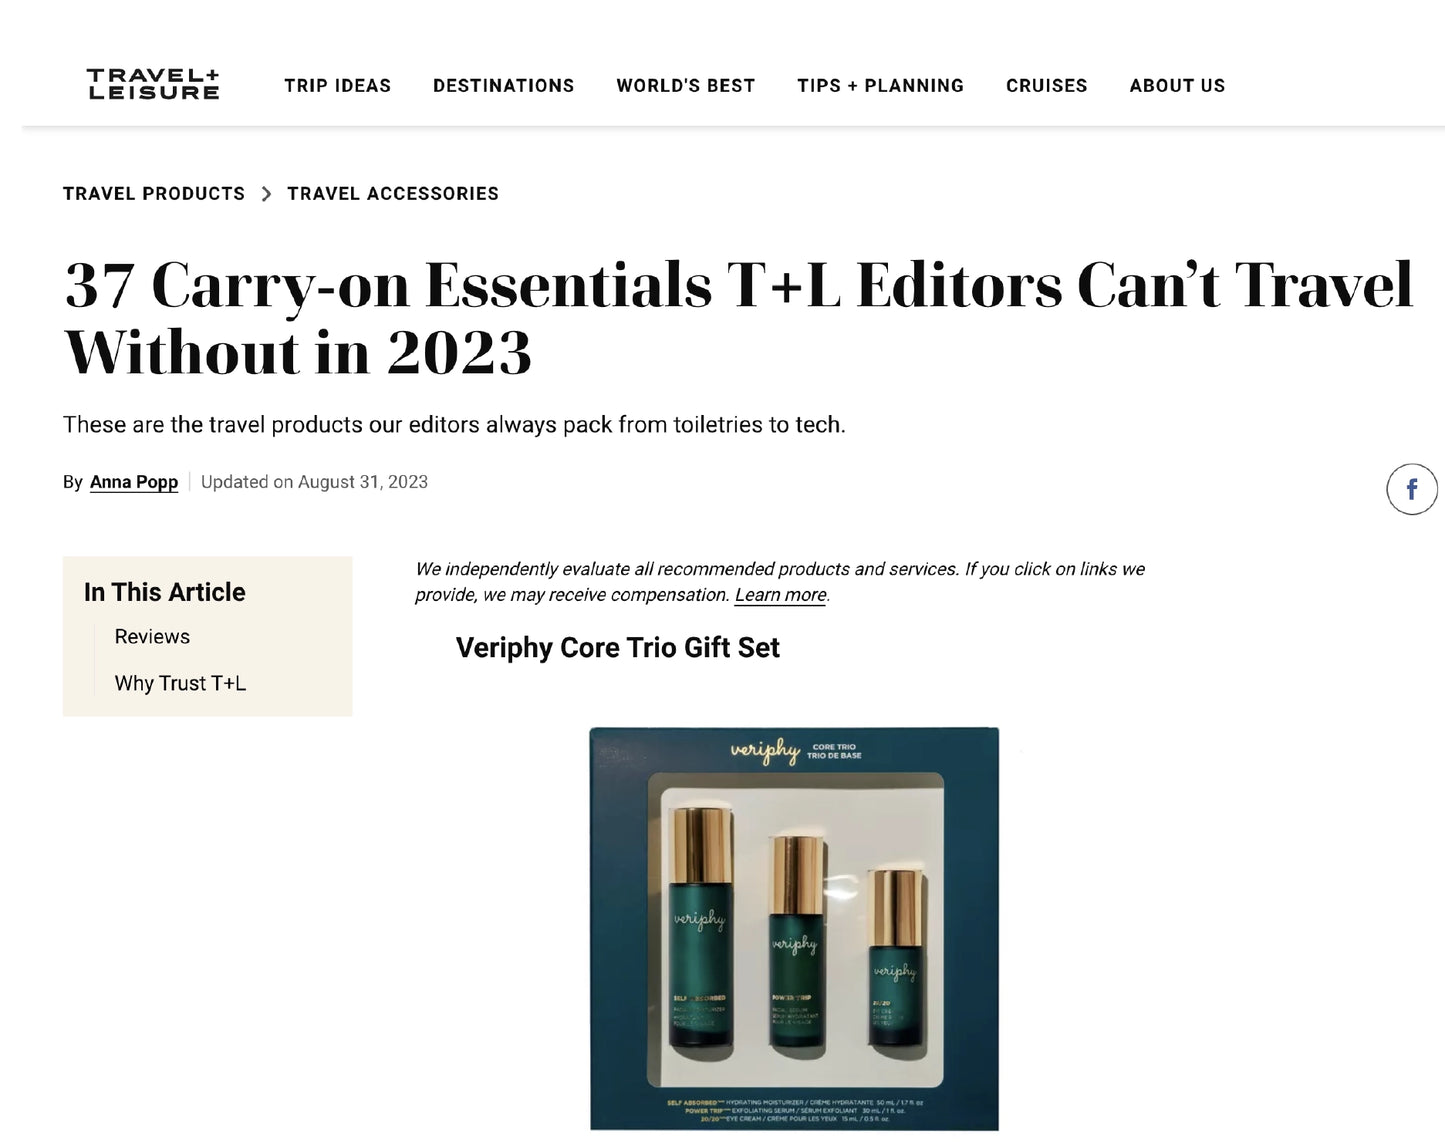 Veriphy Skincare Featured In Travel & Leisure